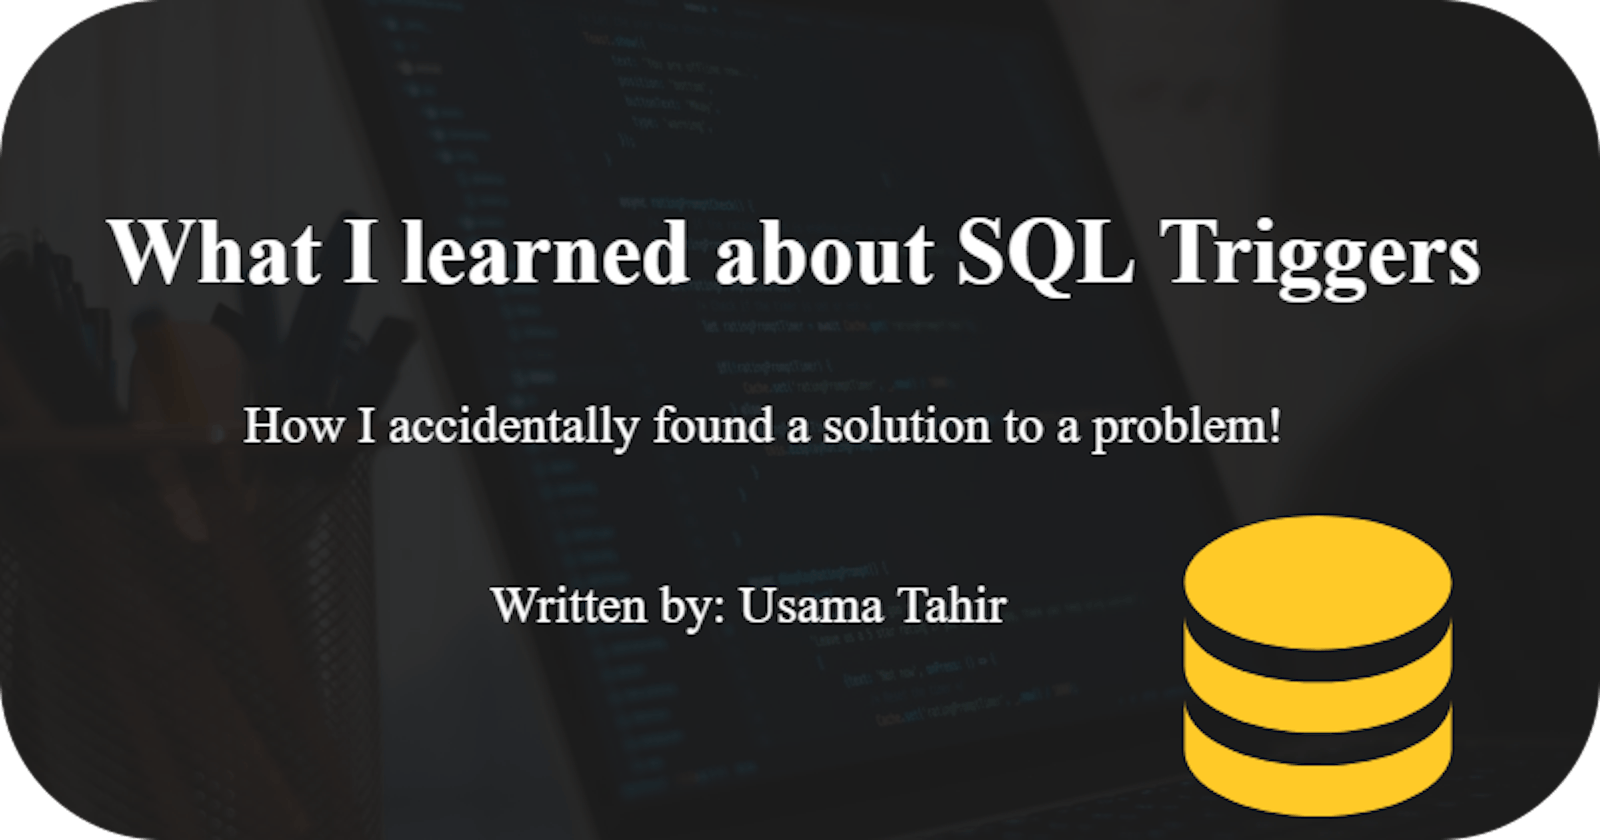 What I learned about SQL Server Triggers